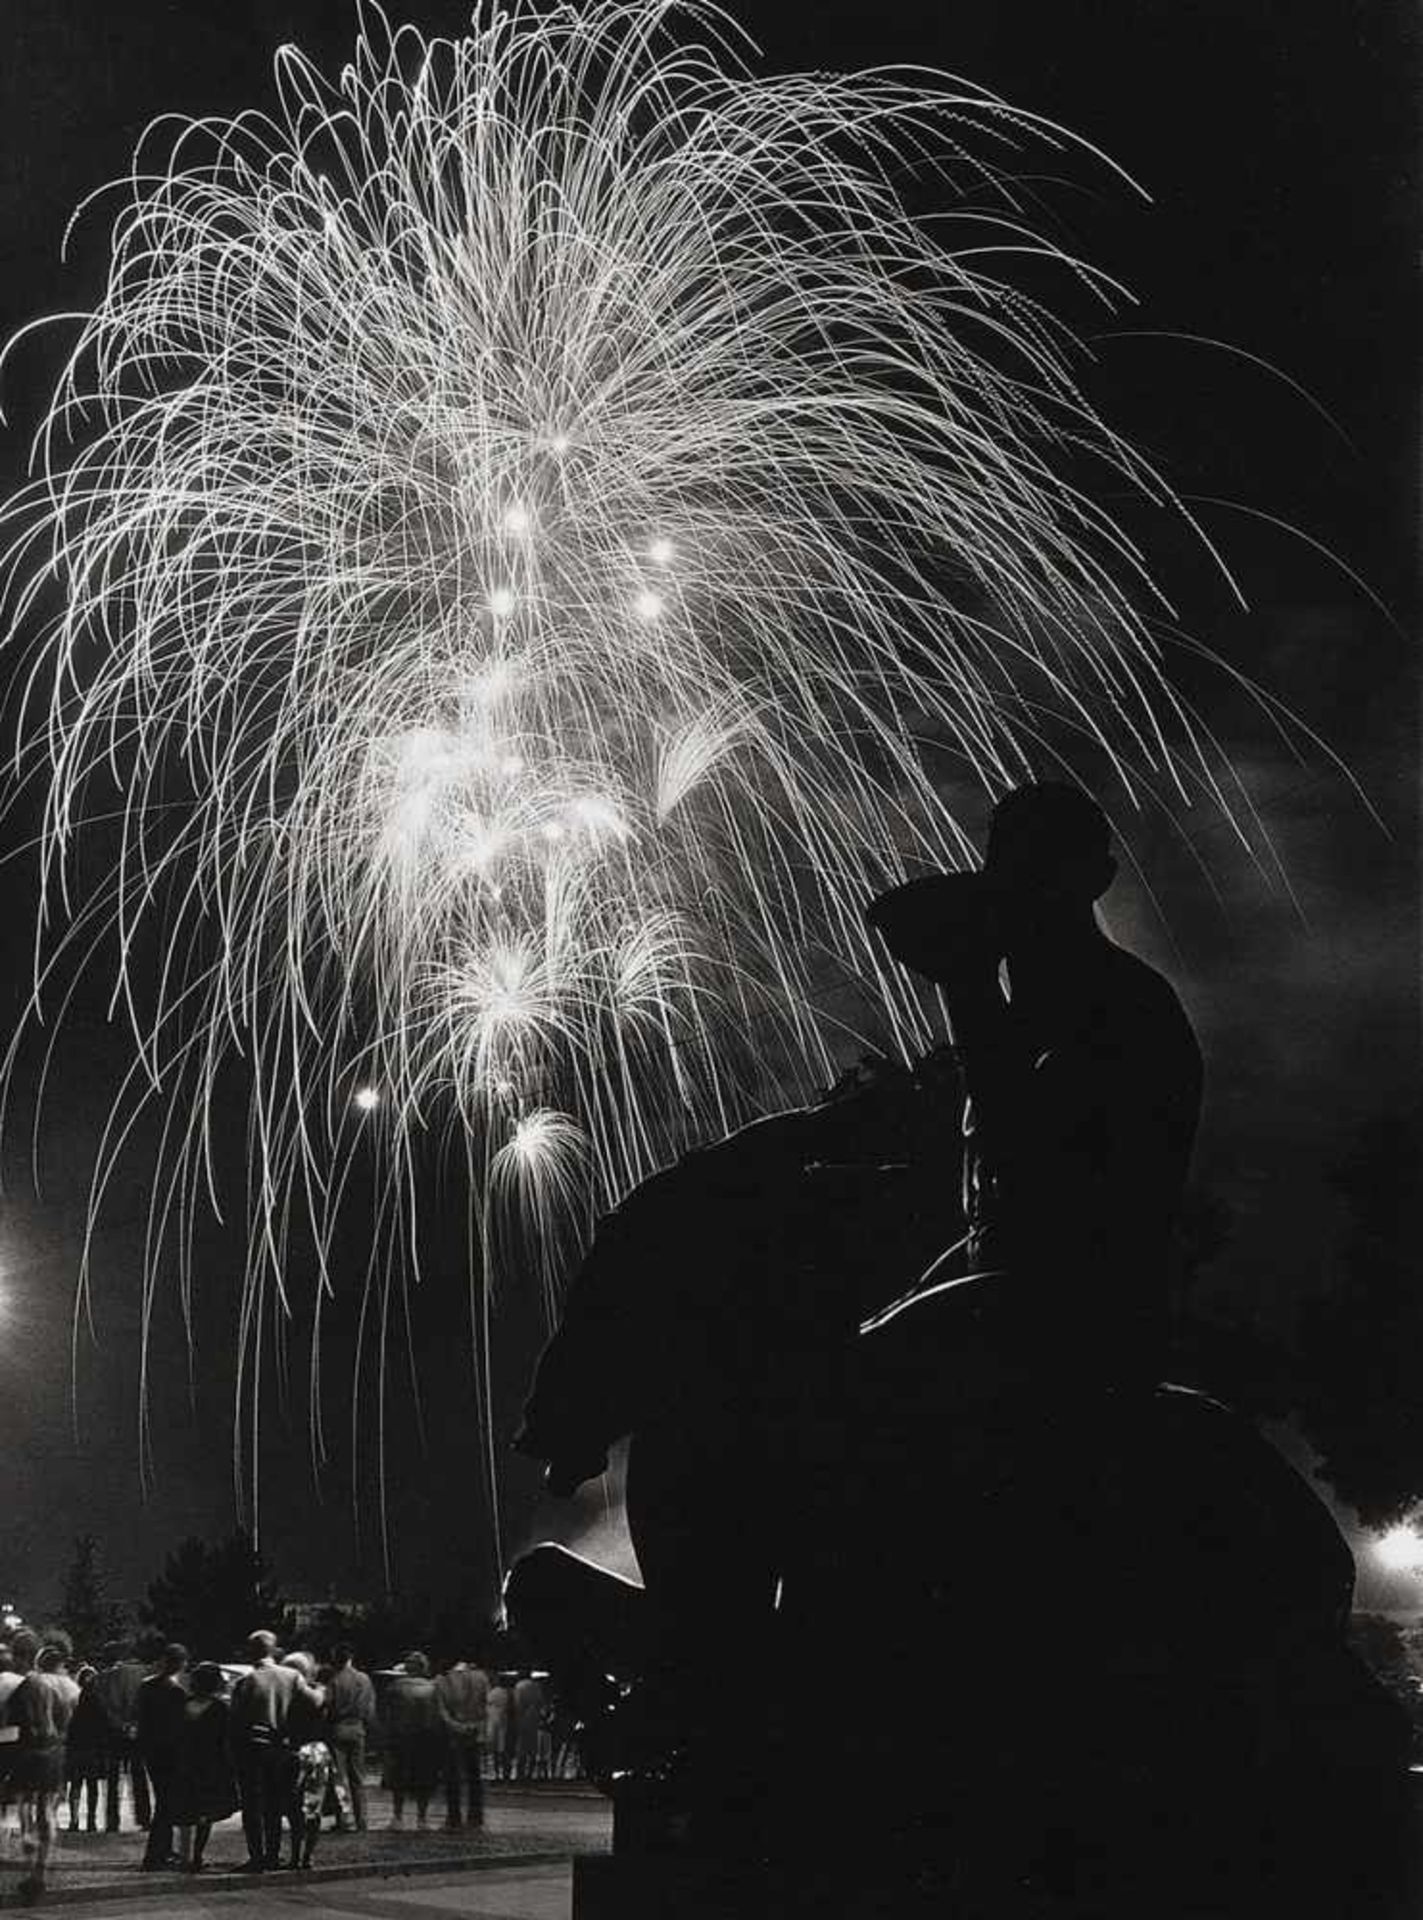 Peter Sr., Richard: Fireworks for May 1, in DresdenFireworks for May 1, in Dresden. 1960s. Vintage